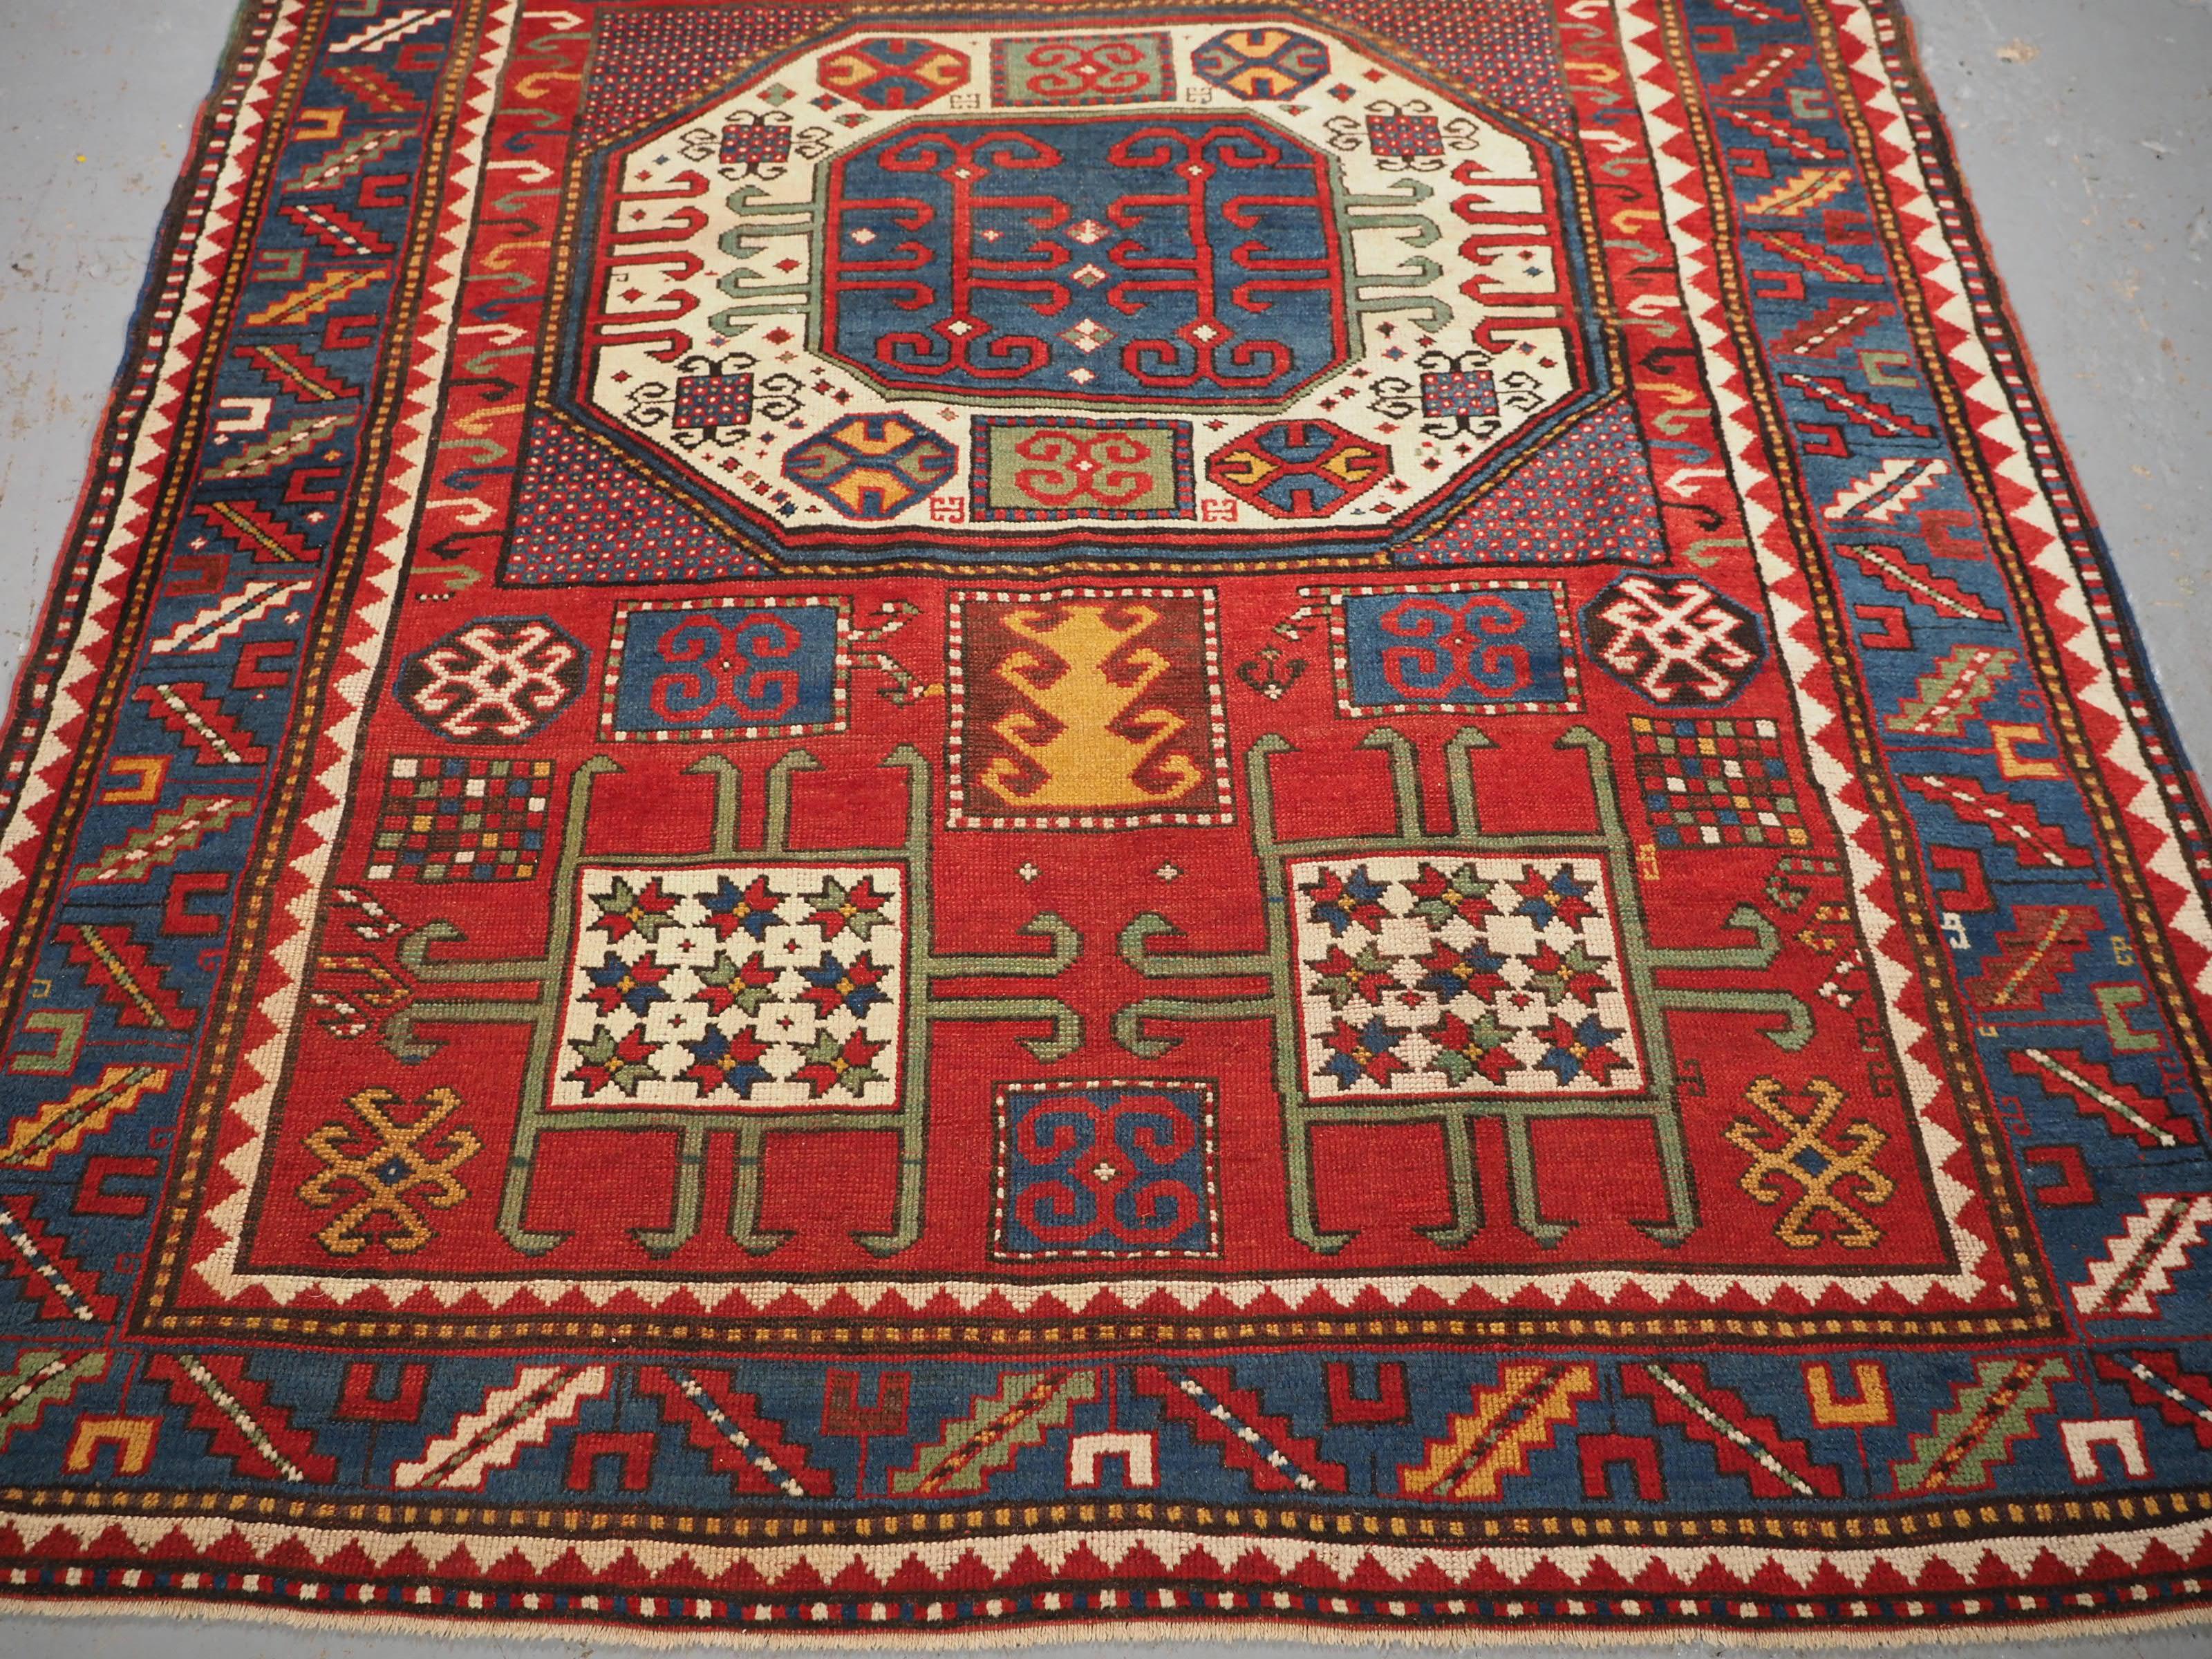 Hand-Woven Antique Caucasian Karachov Kazak Rug of Classic Design on a Red Ground For Sale